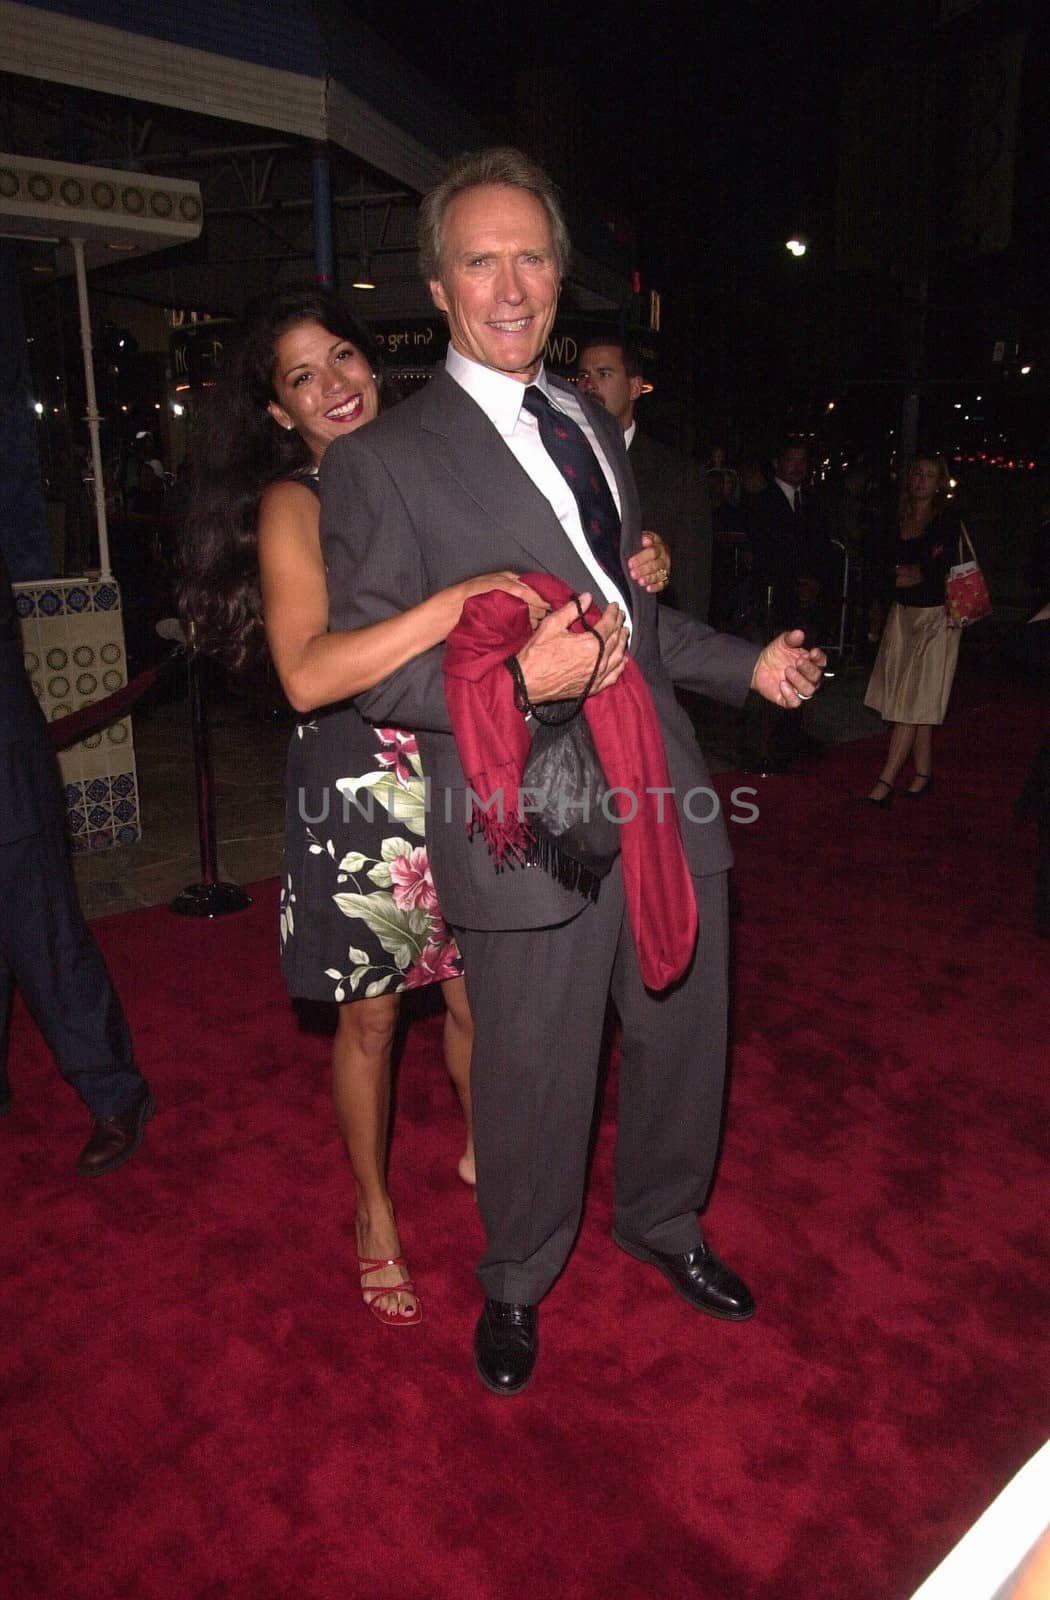 Clint Eastwood and Dina Ruiz at the premiere of "Space Cowboys" in Westwood. 08-01-00